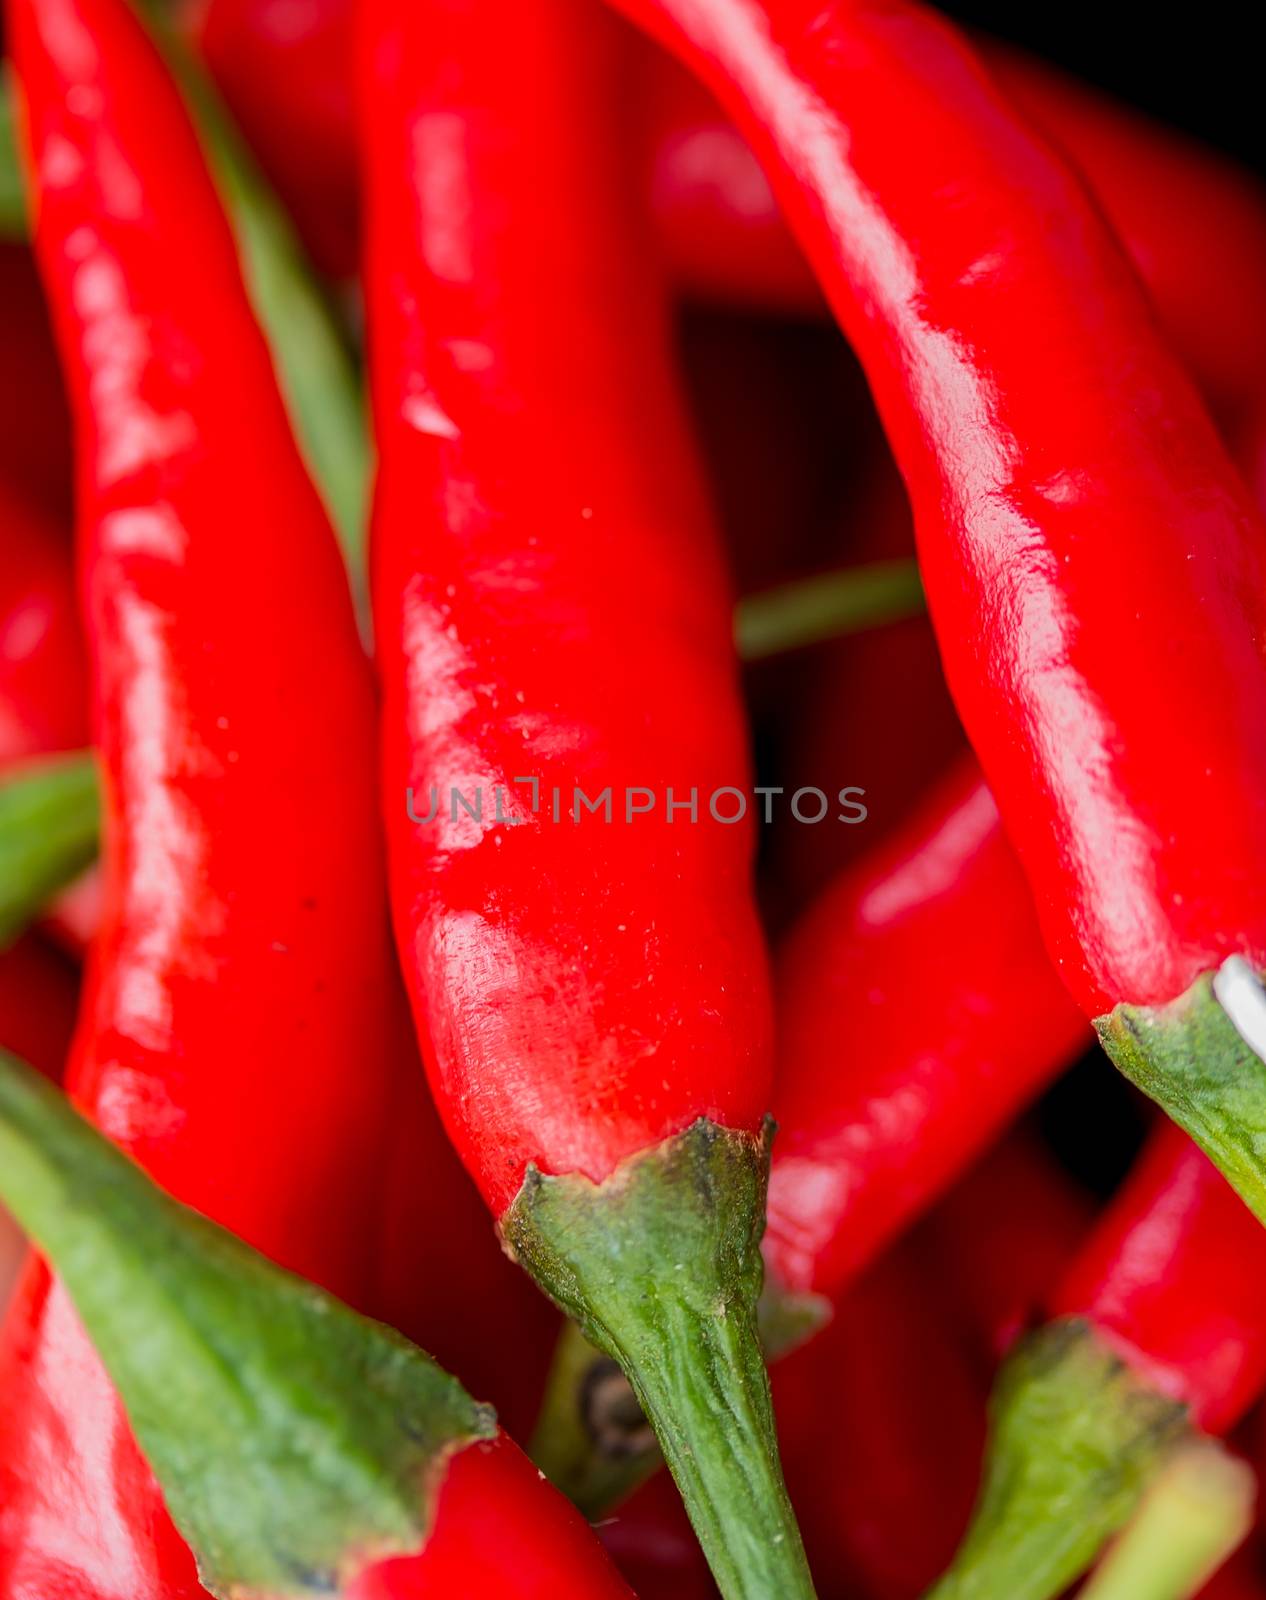 Chilli Peppers Indicates Spice Capsaicin And Chilies by stuartmiles